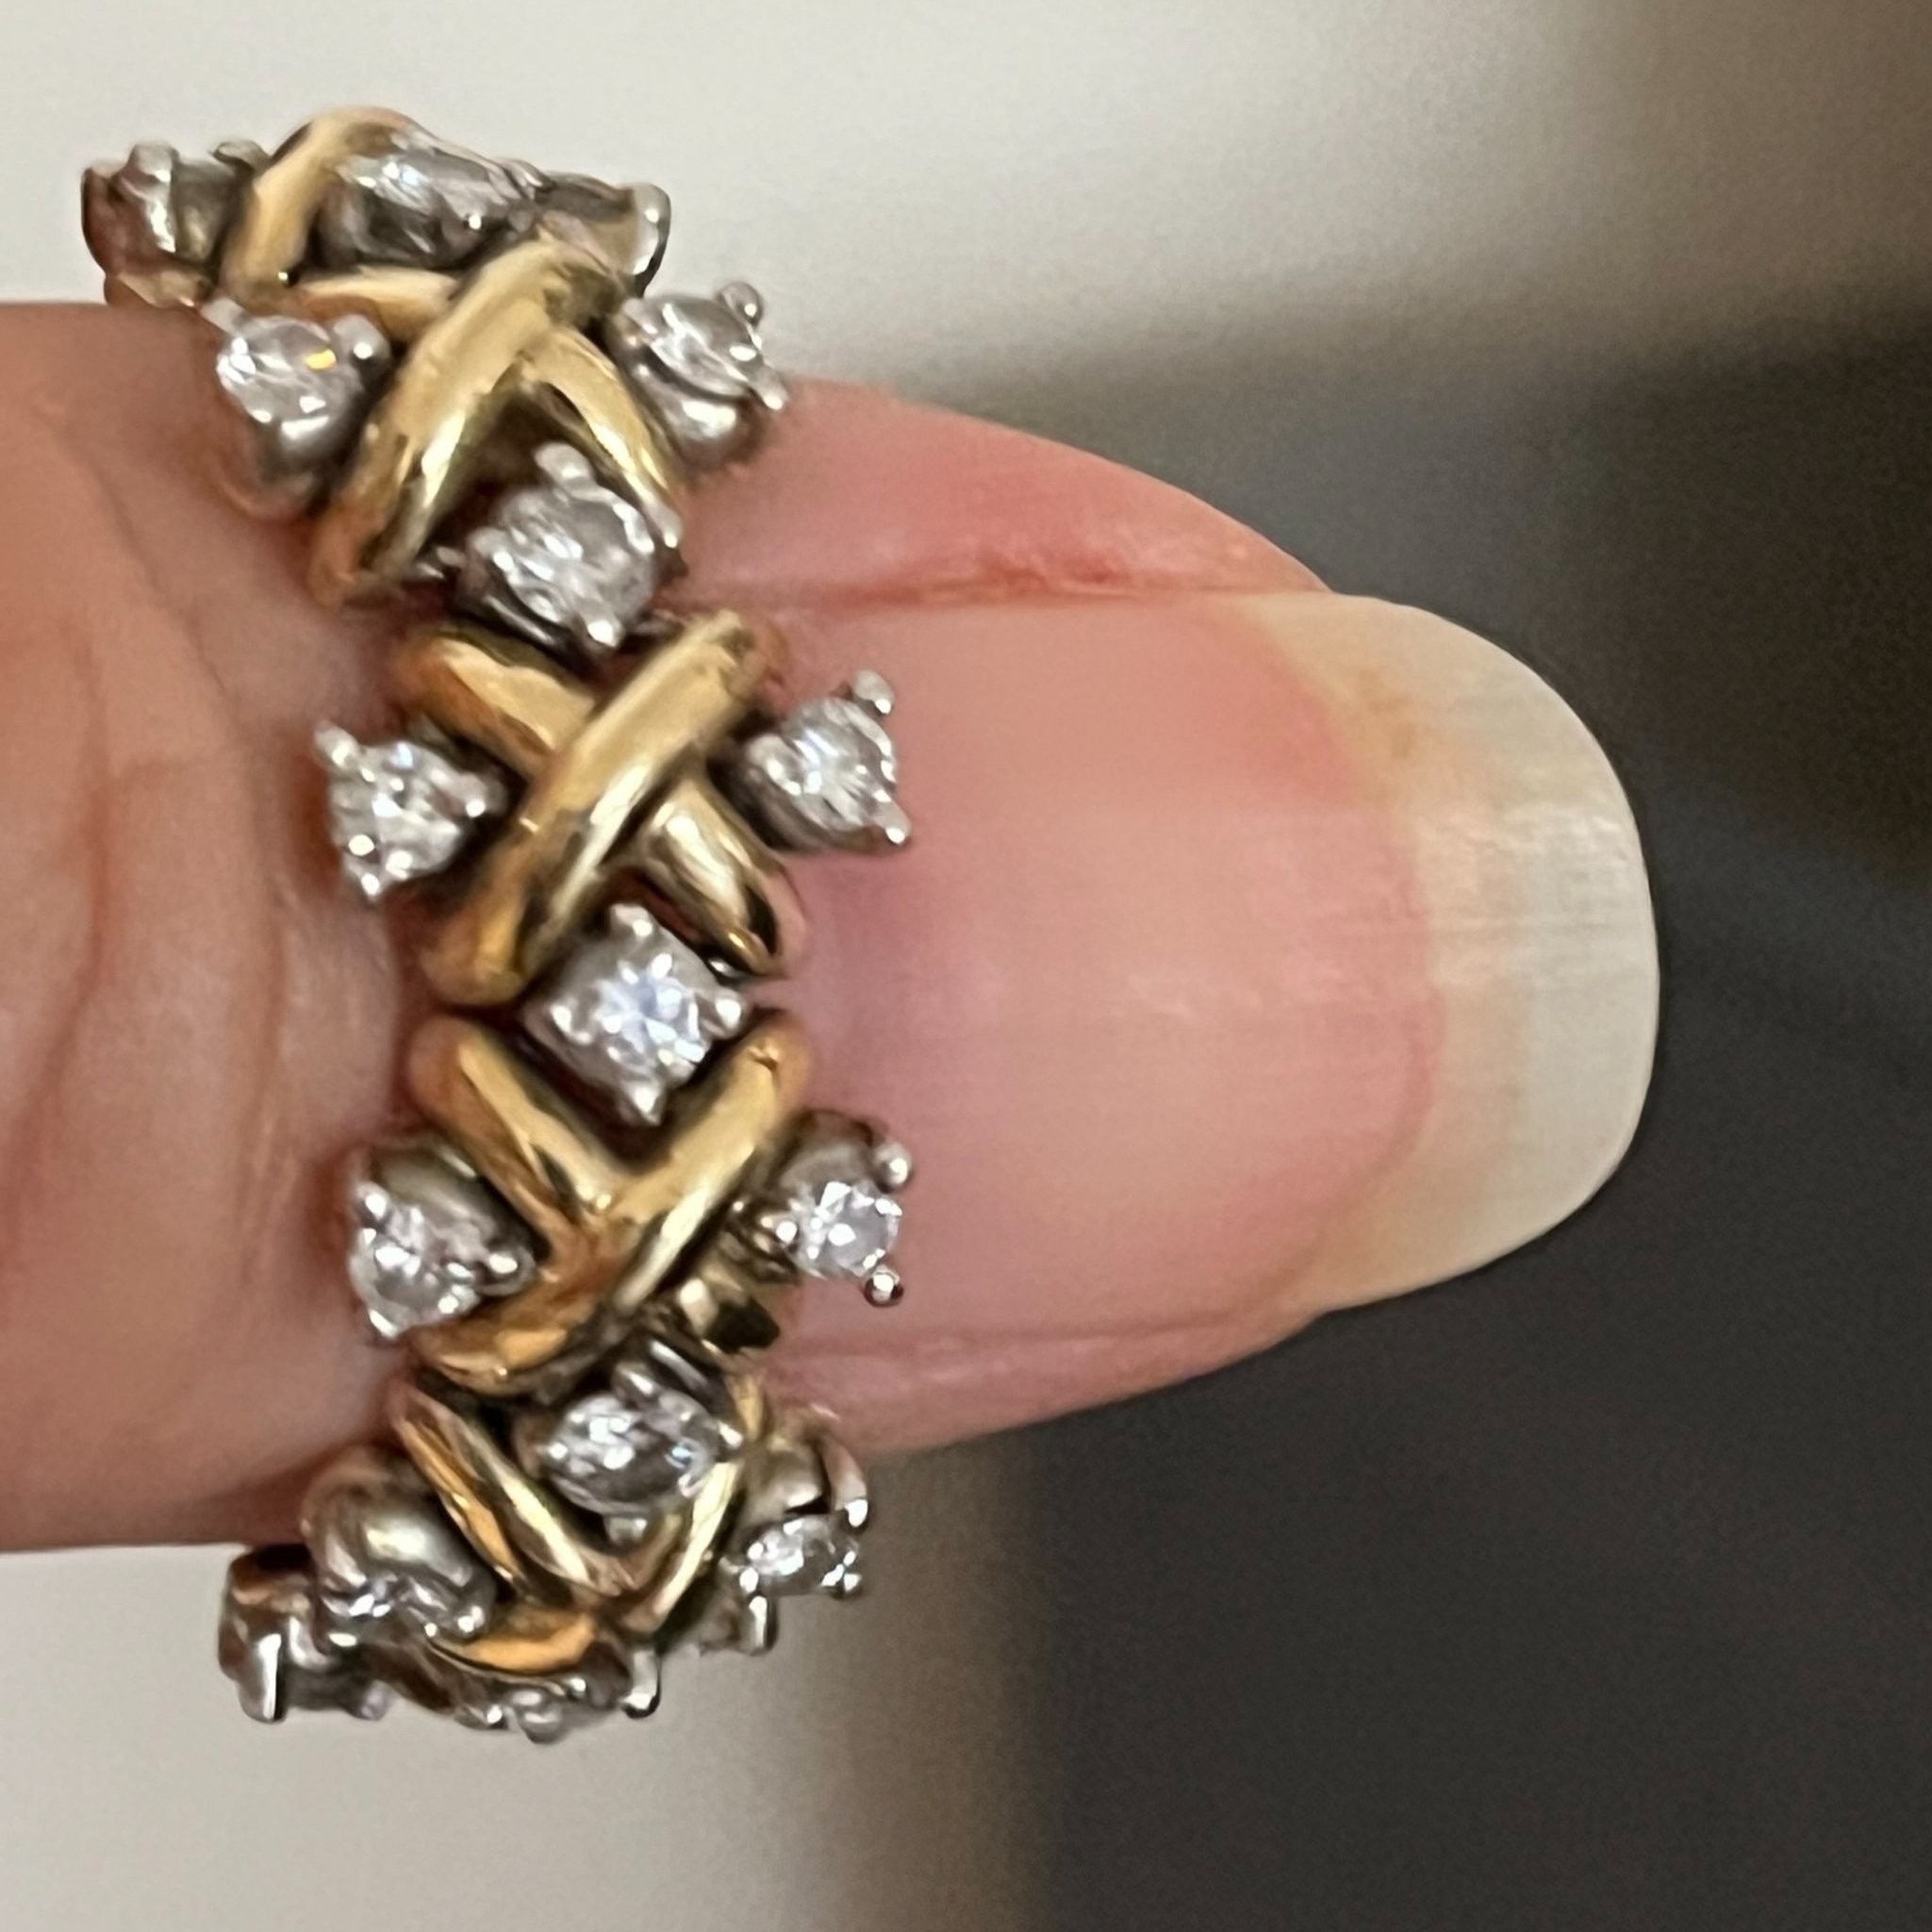 The first piece of jewelry Randi fell in love with: her grandmother's ring